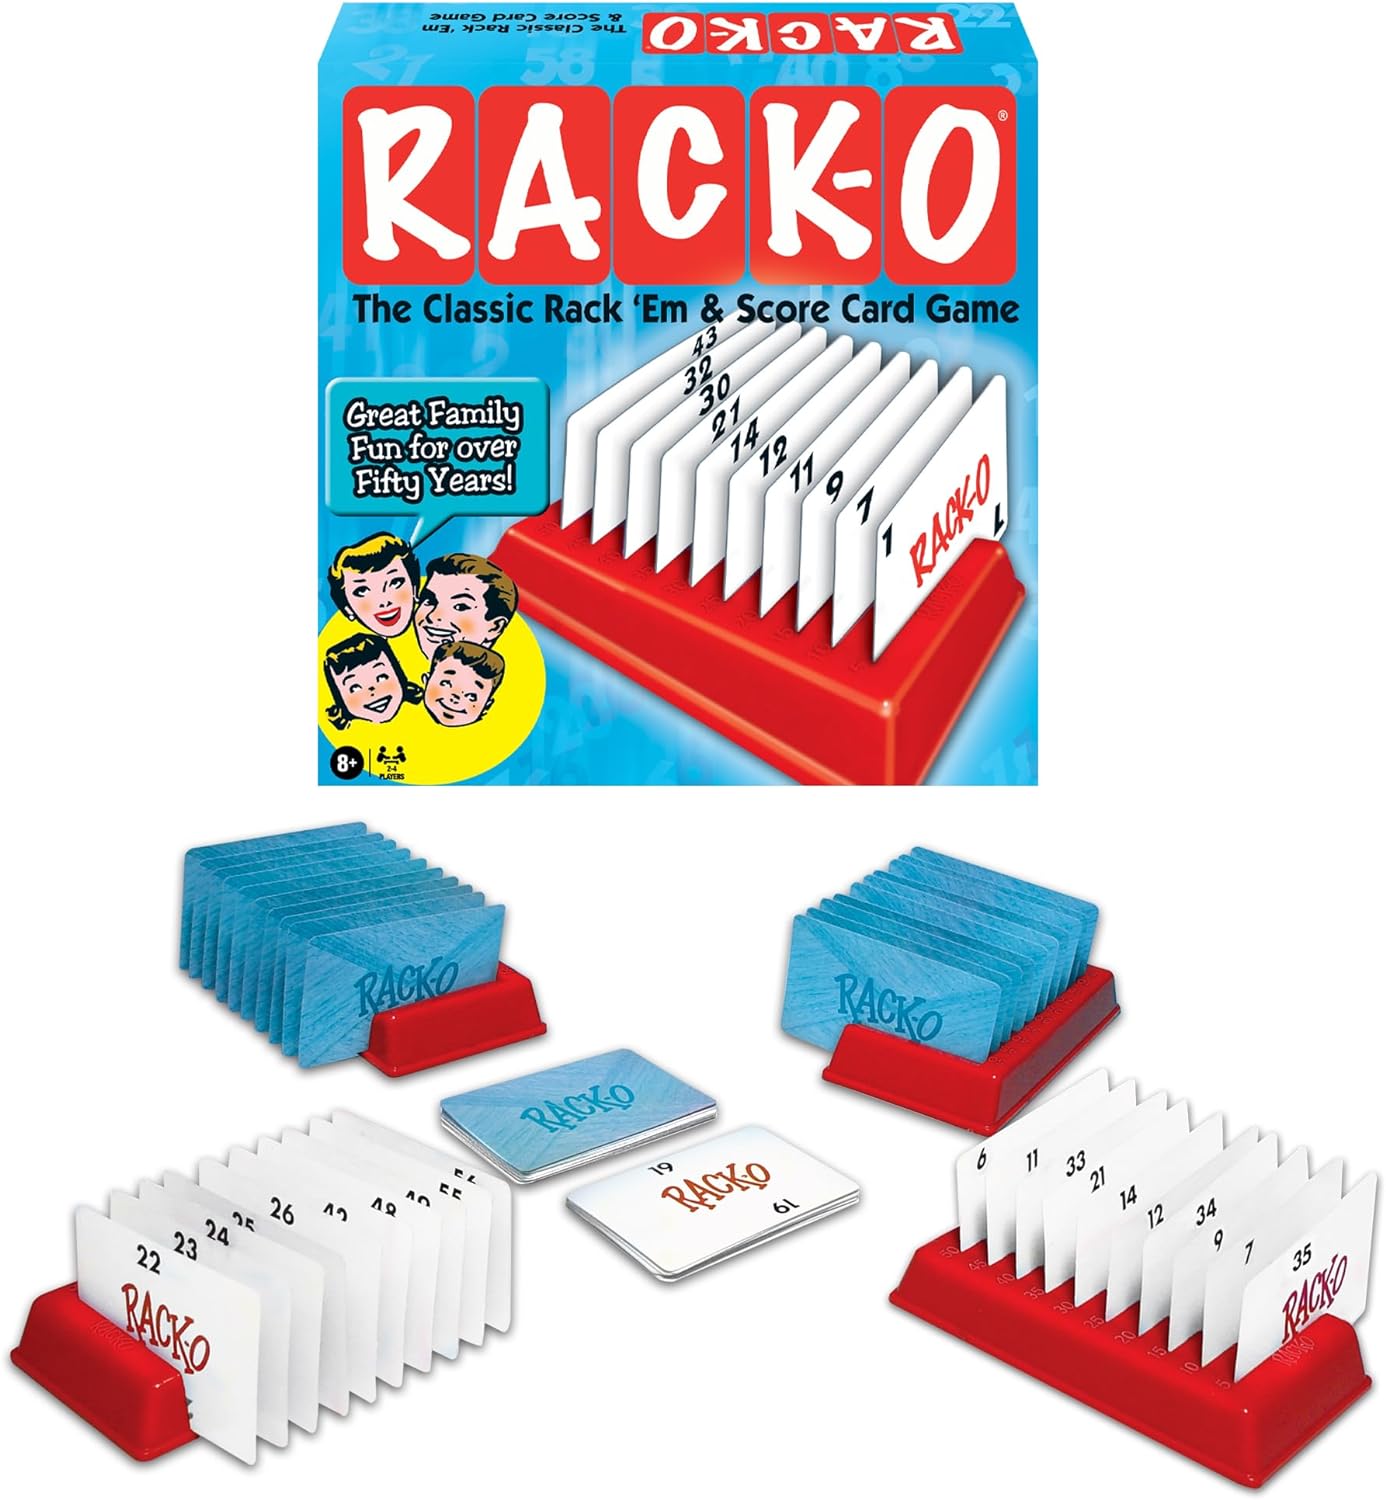 Rack-O Retro Game by  USA, Classic Tabletop Game Enjoyed by Families since the 1950'S! Ages 8+, 2-4 Players 